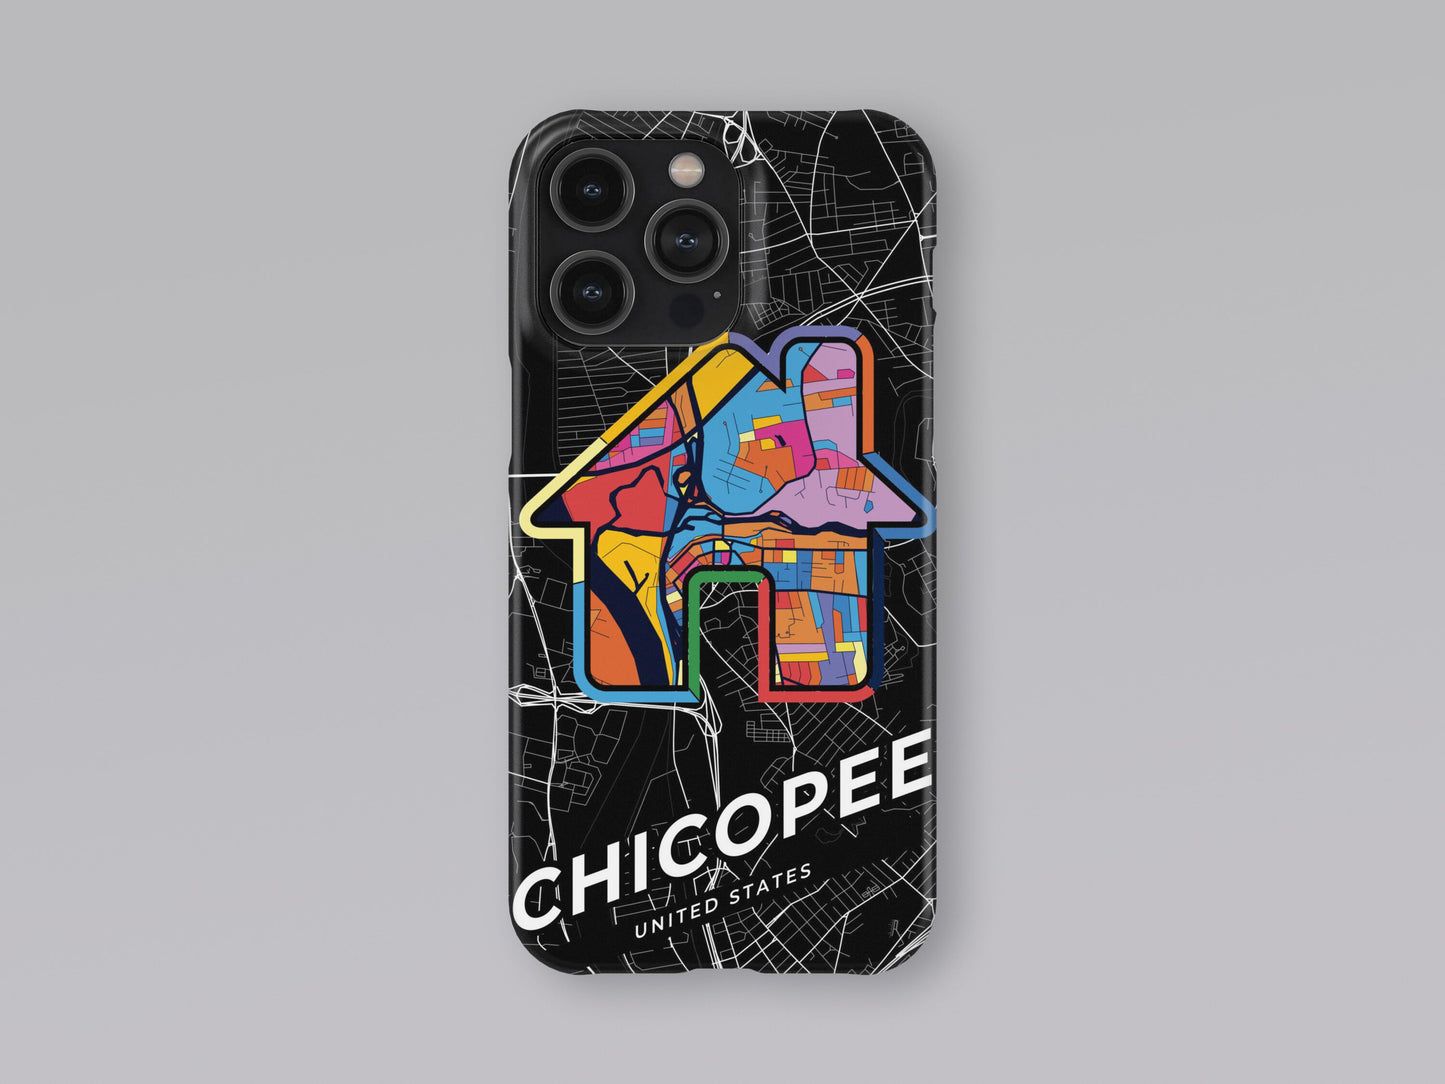 Chicopee Massachusetts slim phone case with colorful icon. Birthday, wedding or housewarming gift. Couple match cases. 3